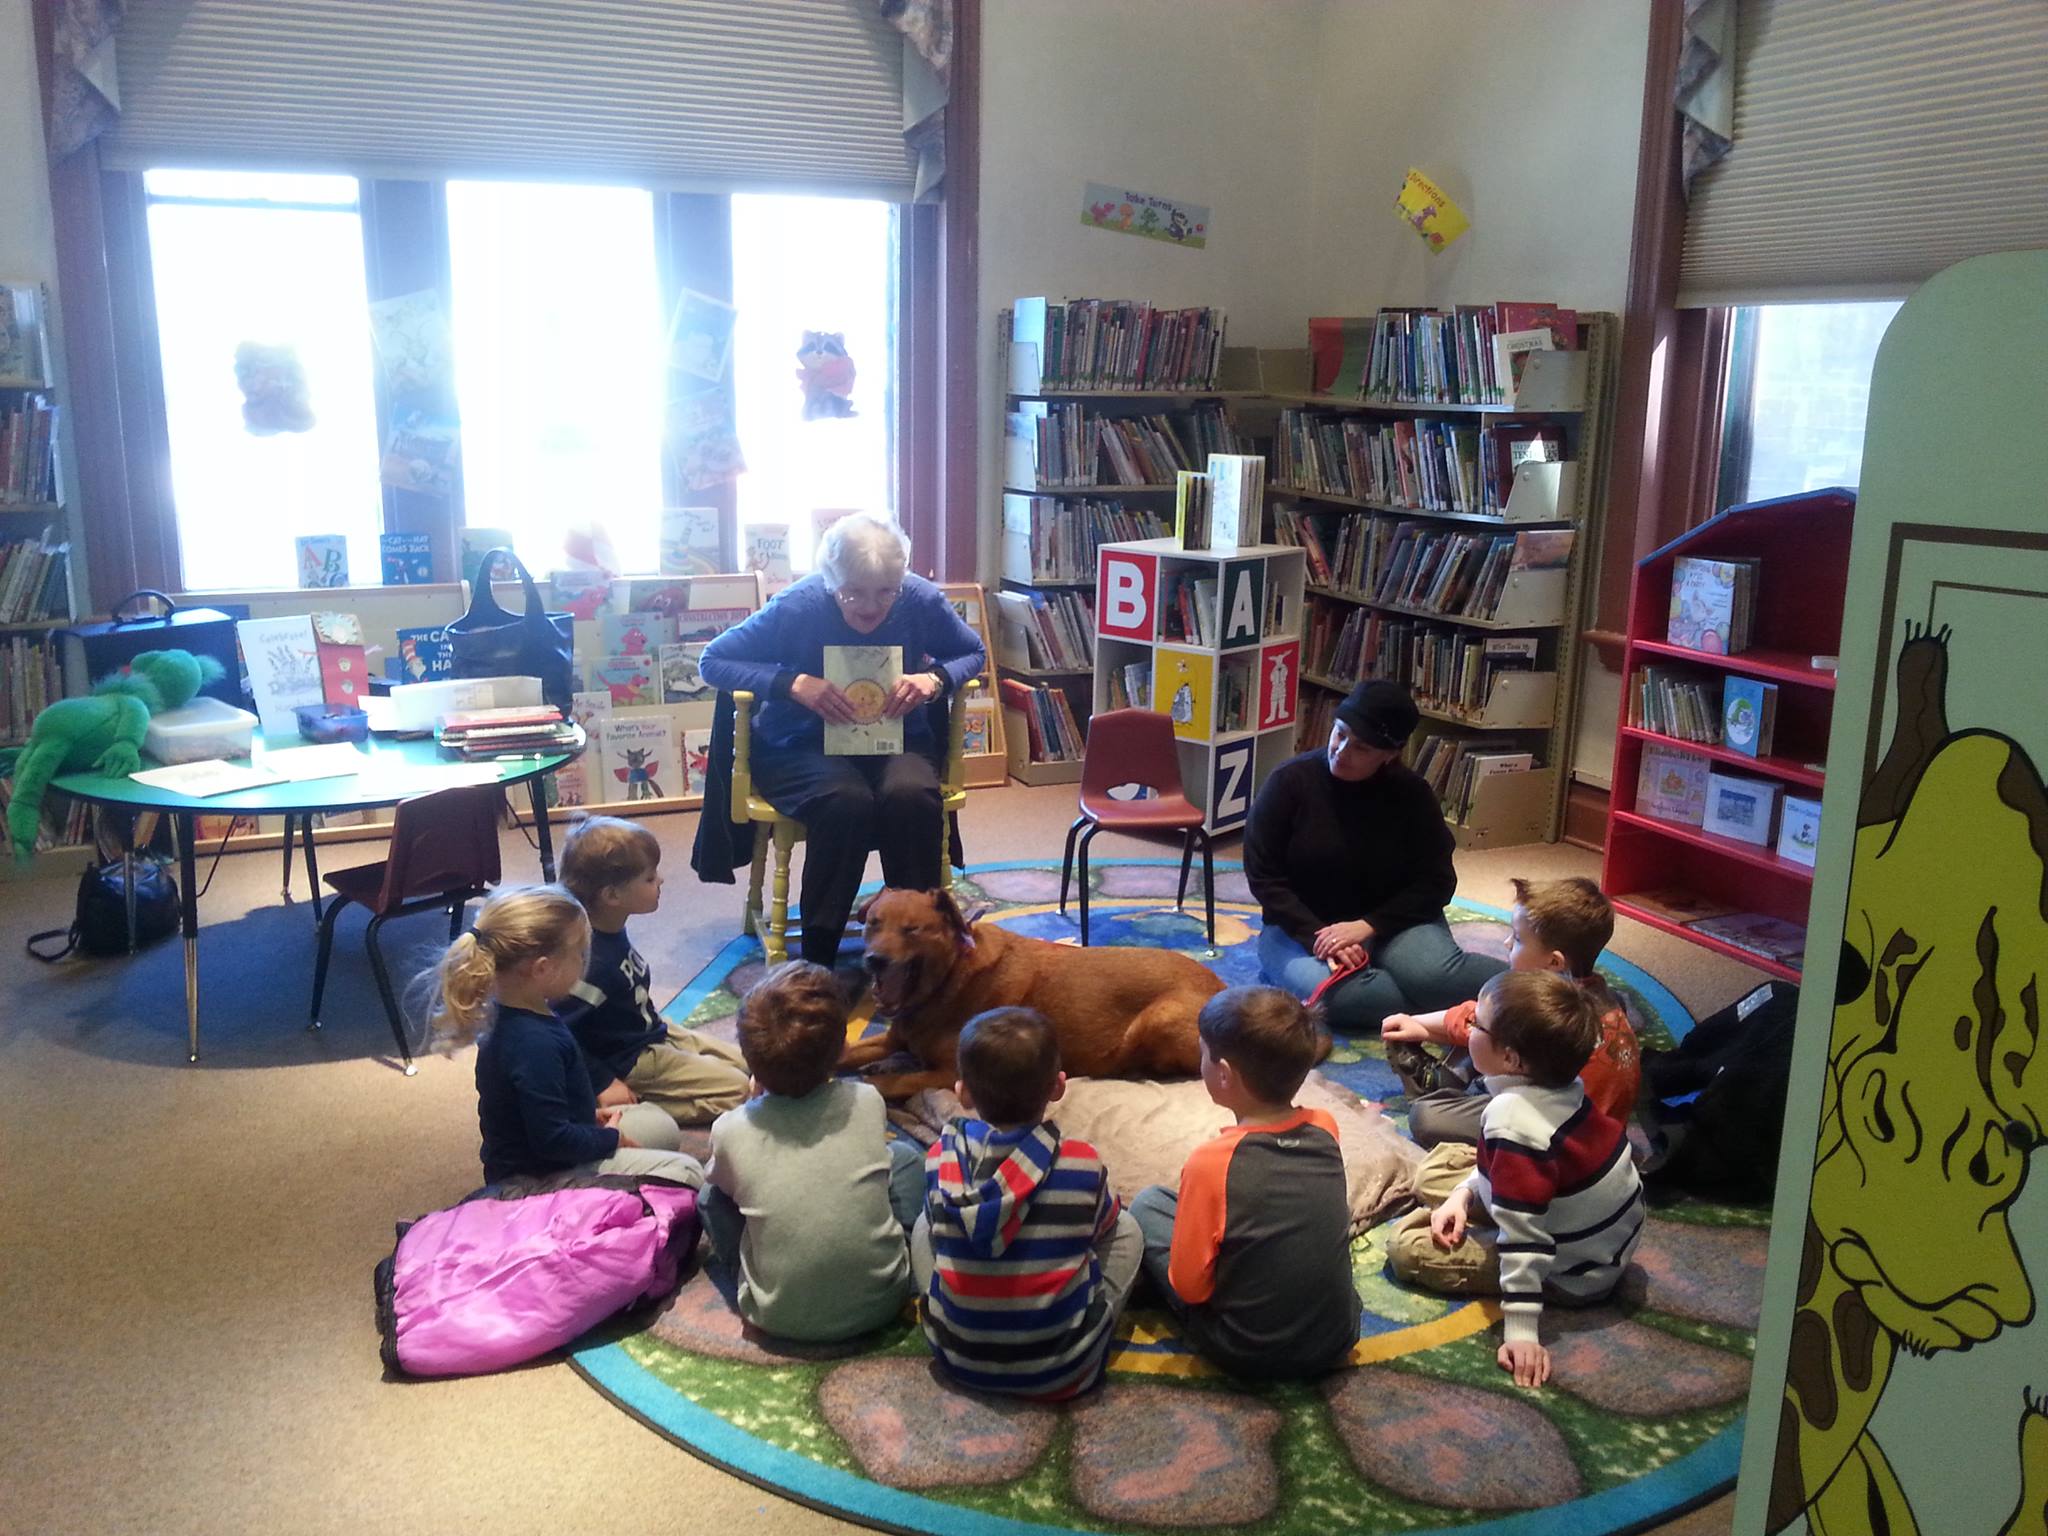 Story time at the Buena Vista Public Library